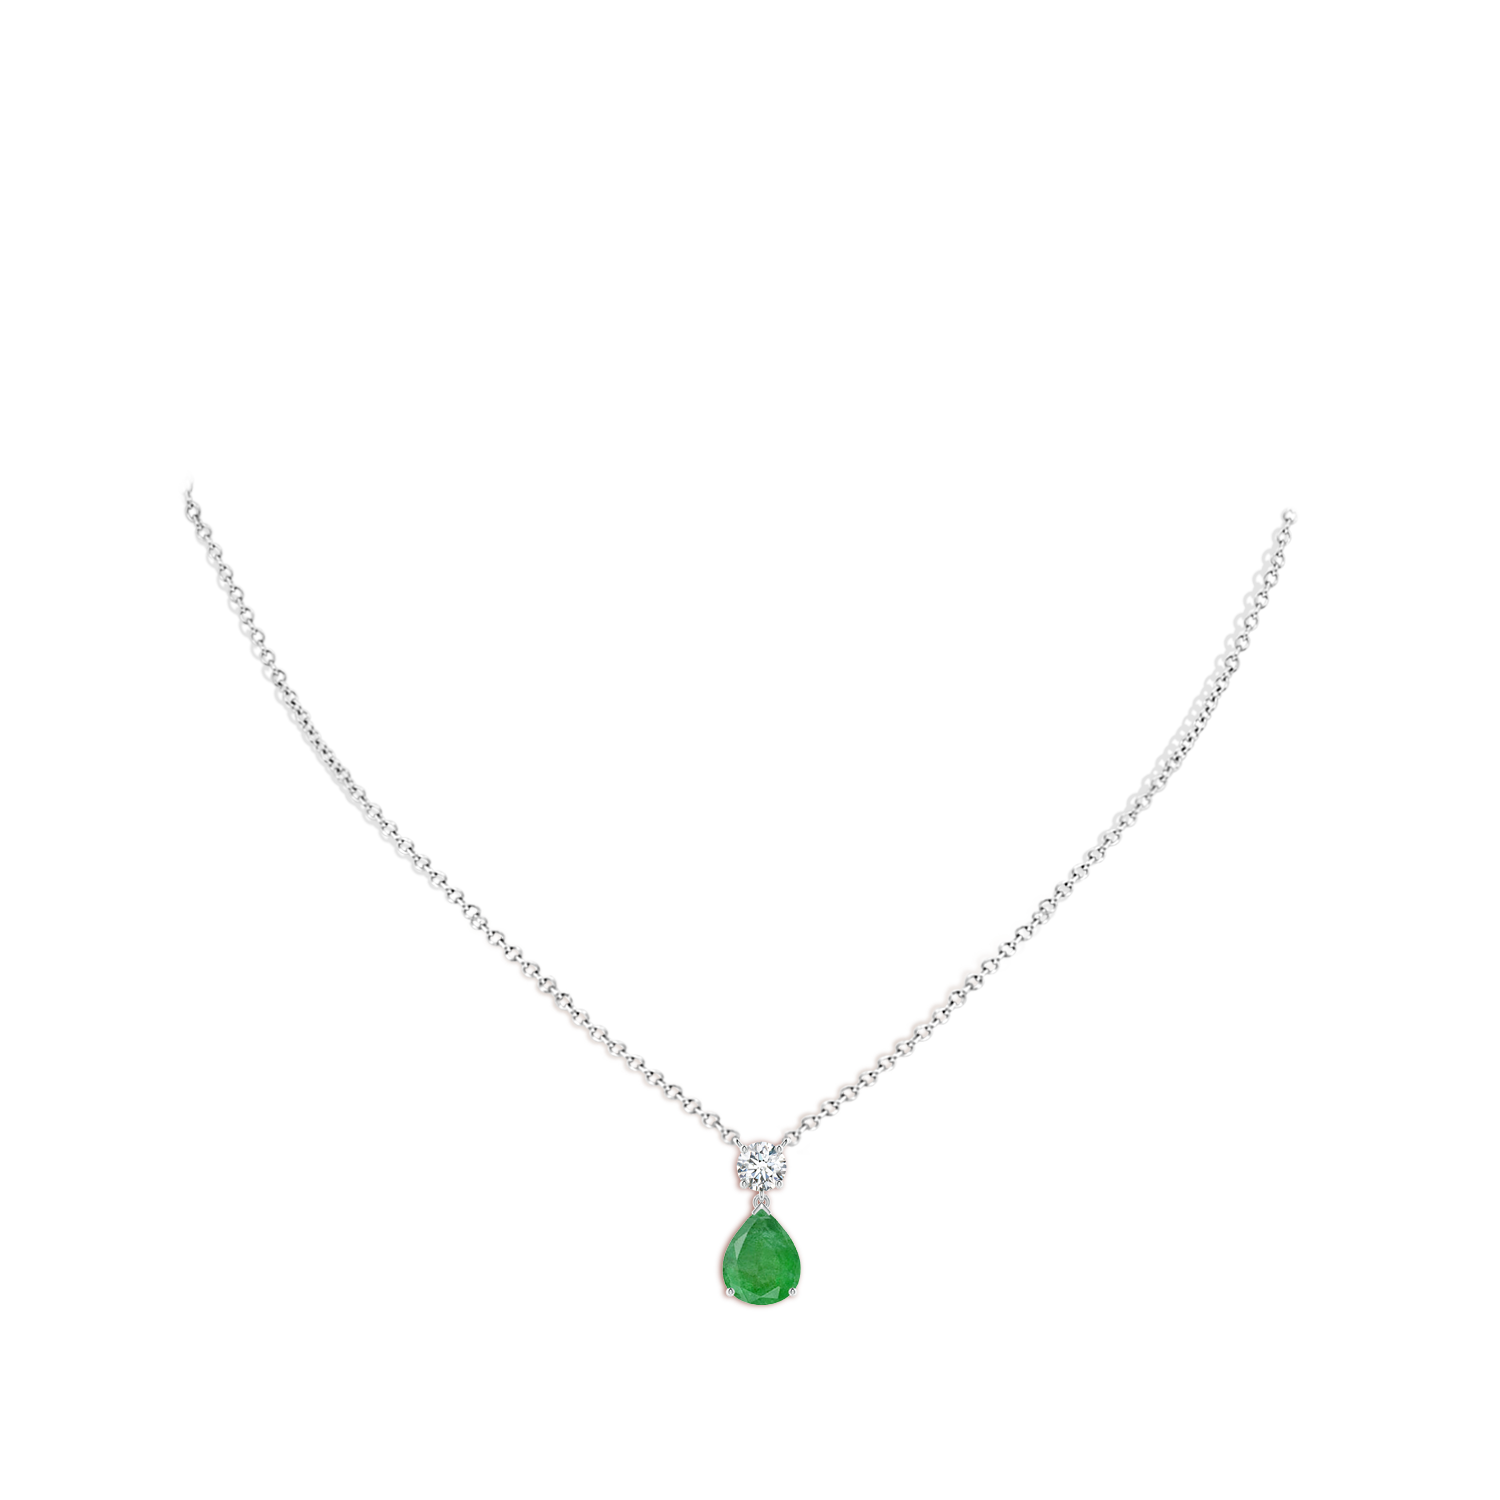 A - Emerald / 3 CT / 14 KT White Gold